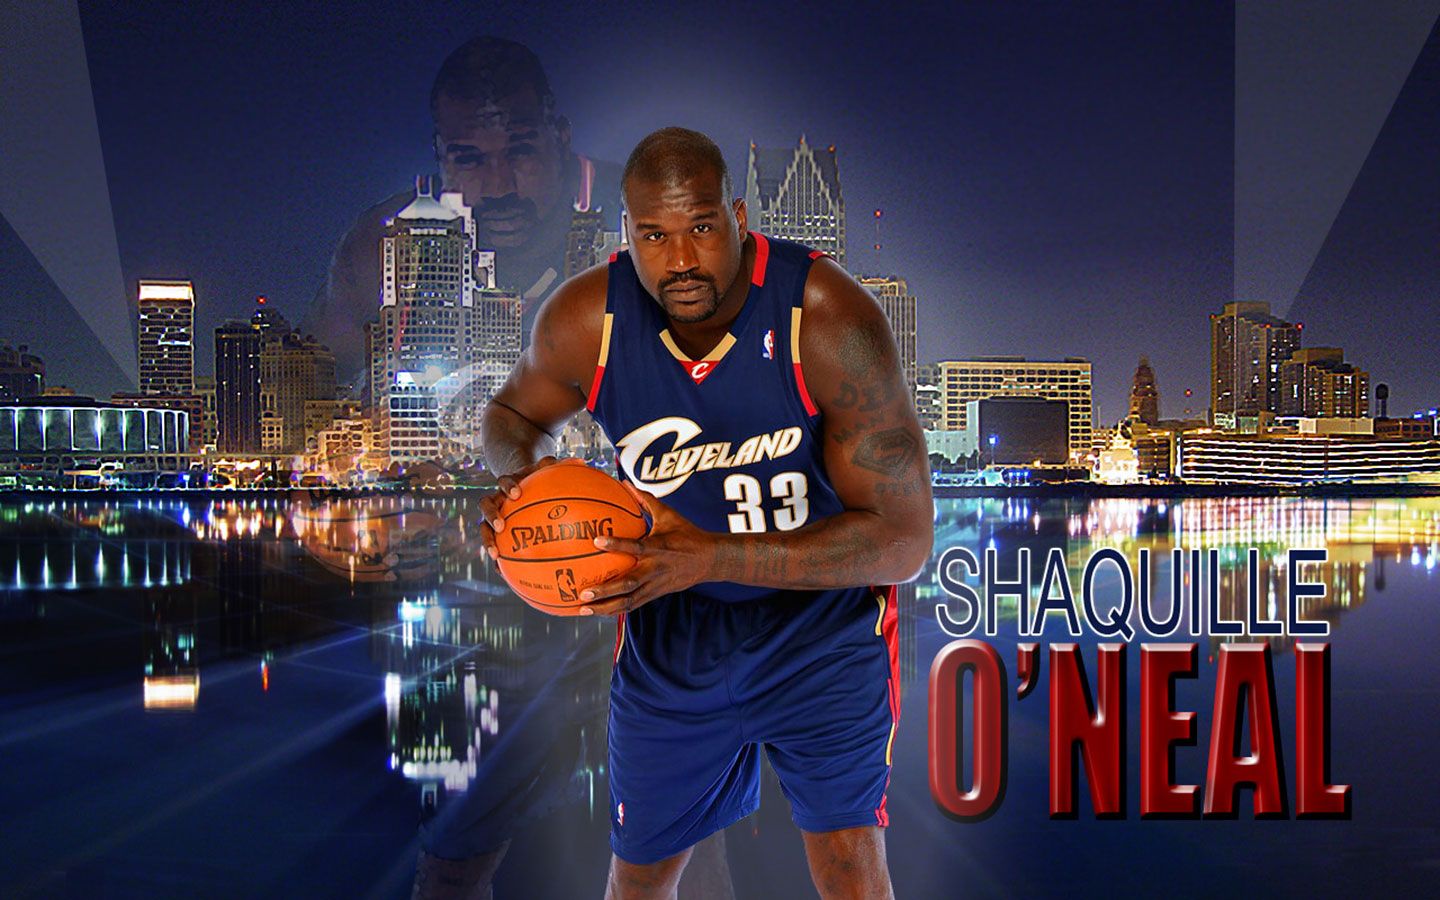 Shaquille O Neal Wallpapers, 4k Ultra Hd Wallpapers - Shaquille O Neal Cavs - HD Wallpaper 